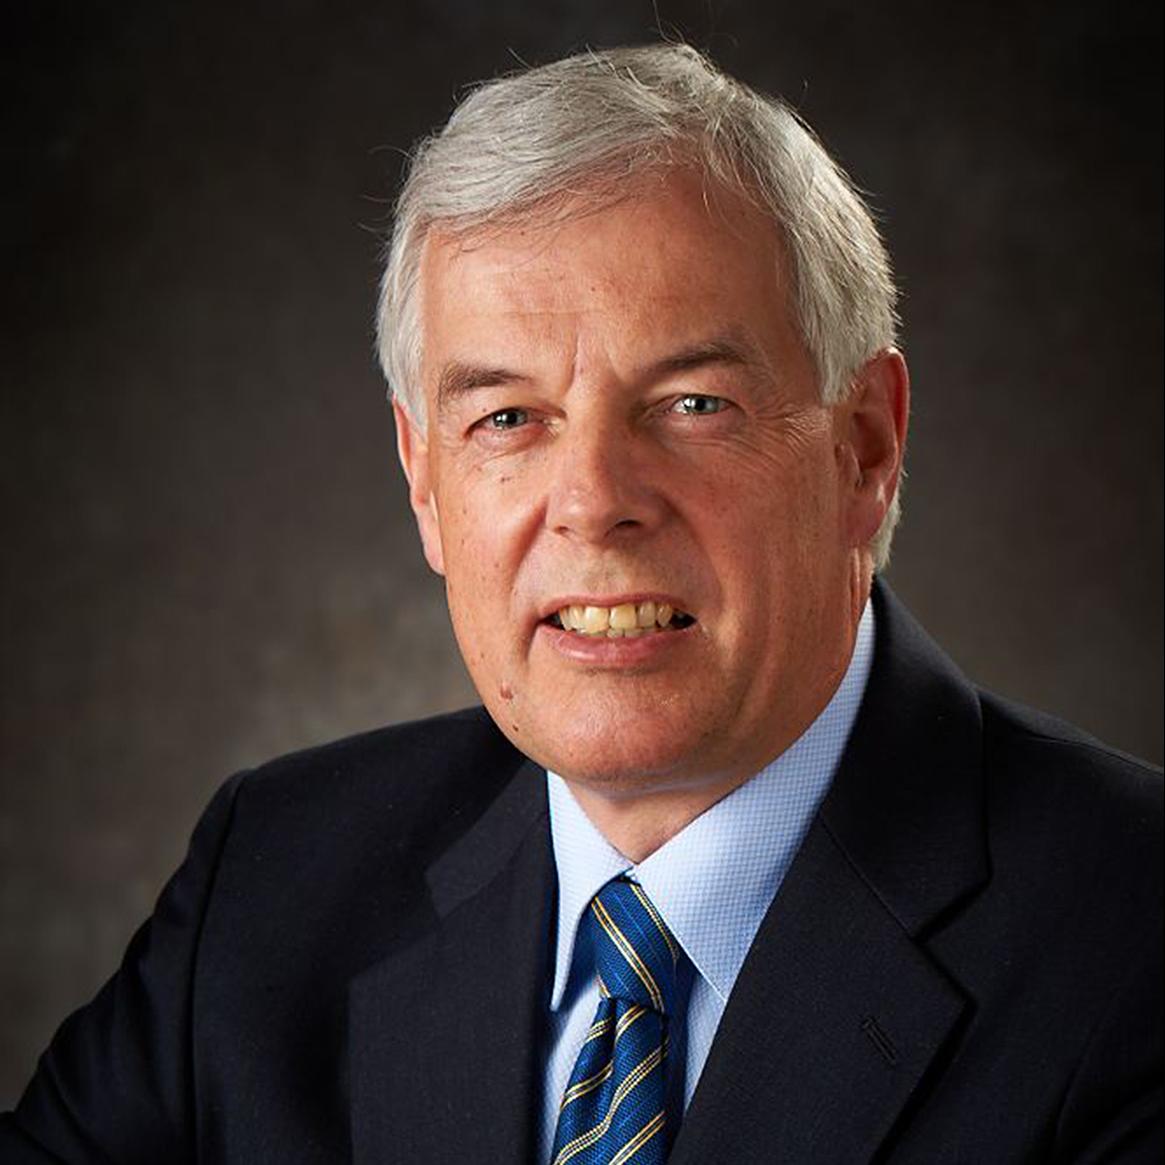 Man with gray hair wearing a dark blazer, light blue shirt, and a blue-striped tie